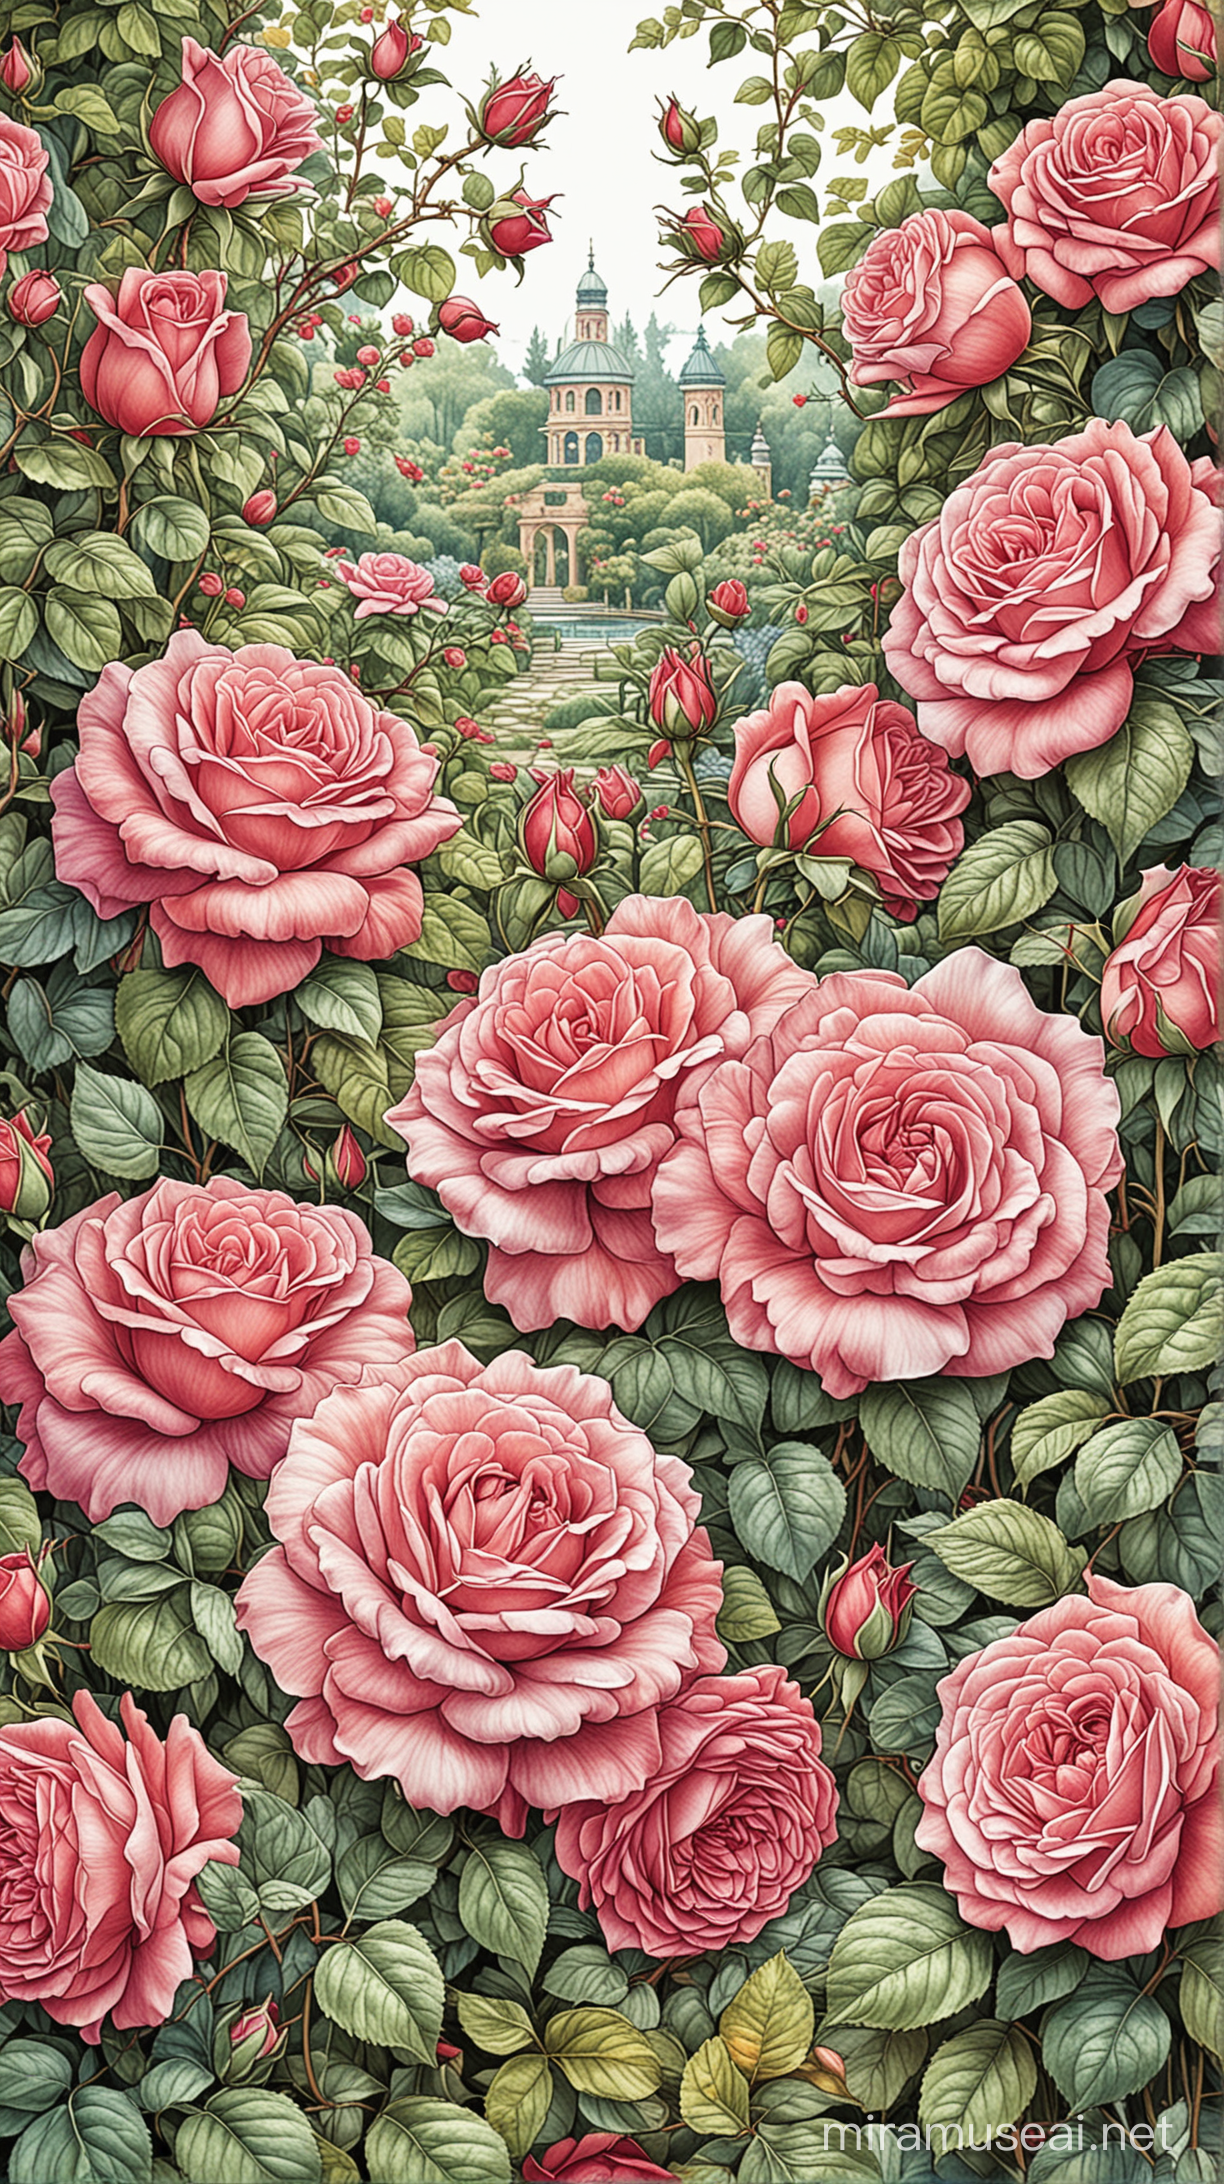 Coloring book of rose garden:a lush rose garden in full bloom. The roses are meticulously rendered, with each petal delicately shaded to capture their velvety texture.